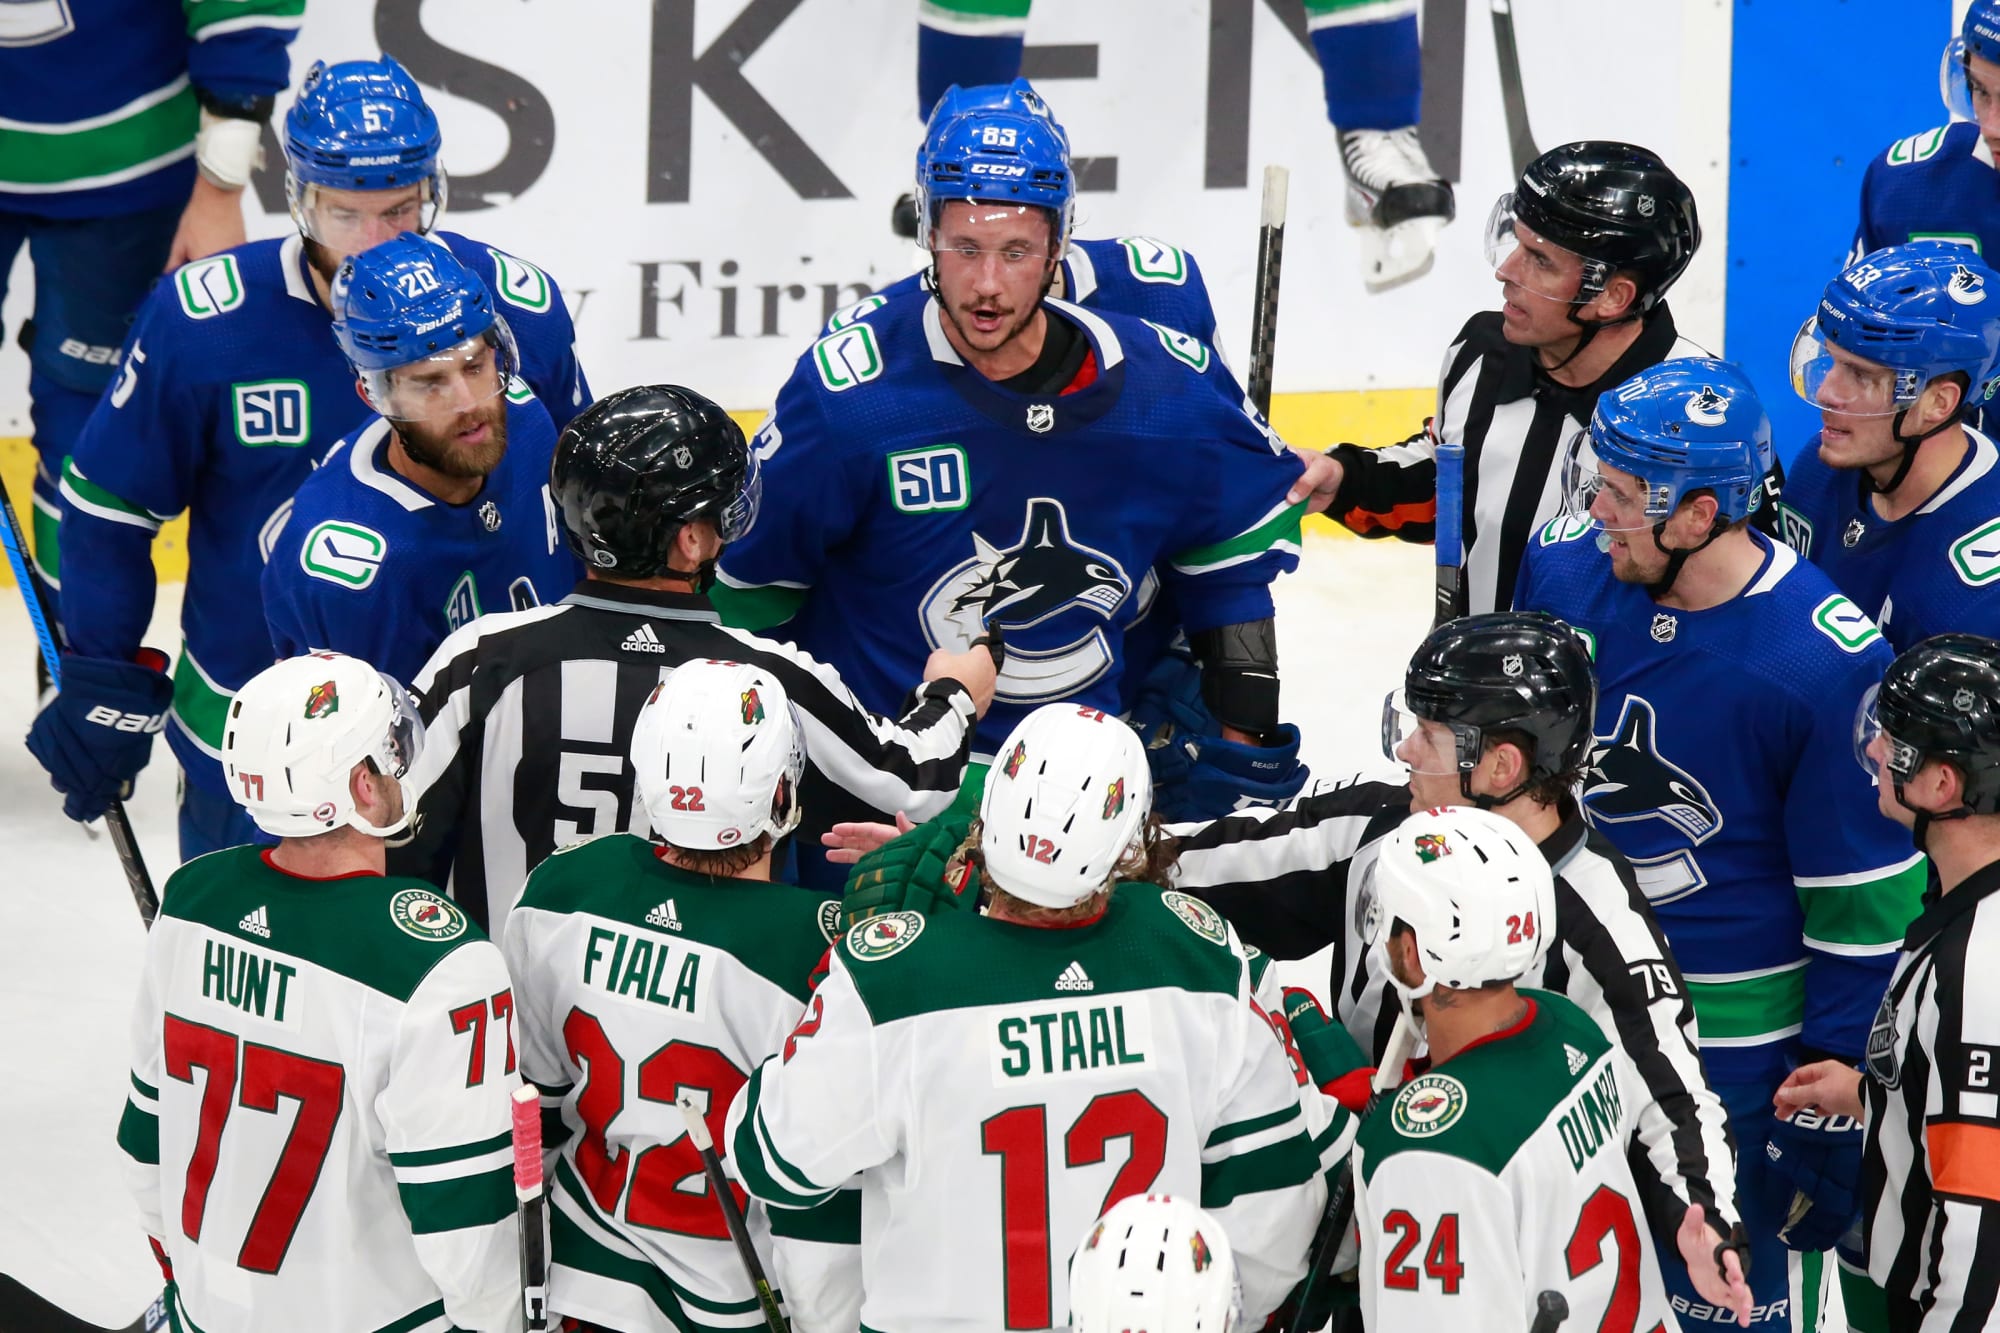 Vancouver Canucks vs. Minnesota Wild Top 3 takeaways from Game 3